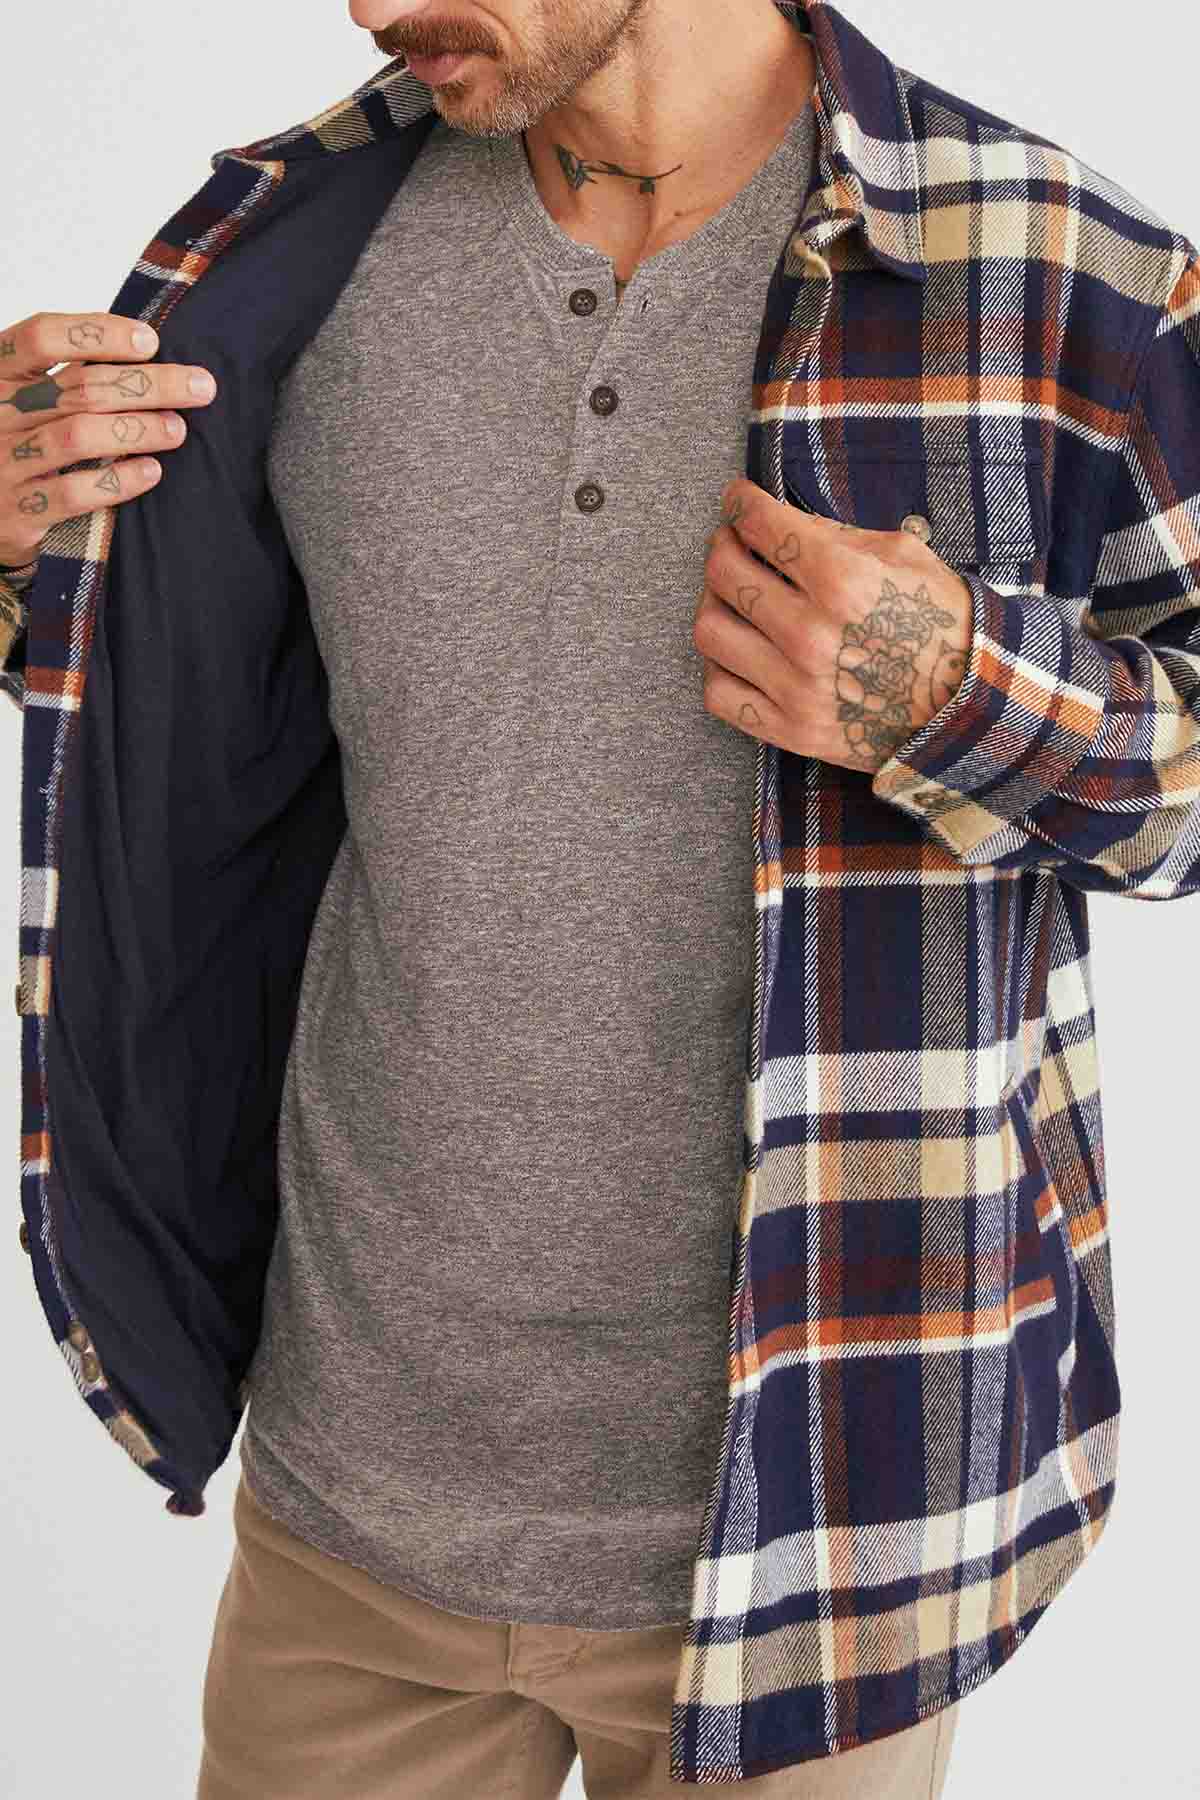 Marine Layer - Signature Lined Camping Shirt - Navy/Brown Plaid - Inside